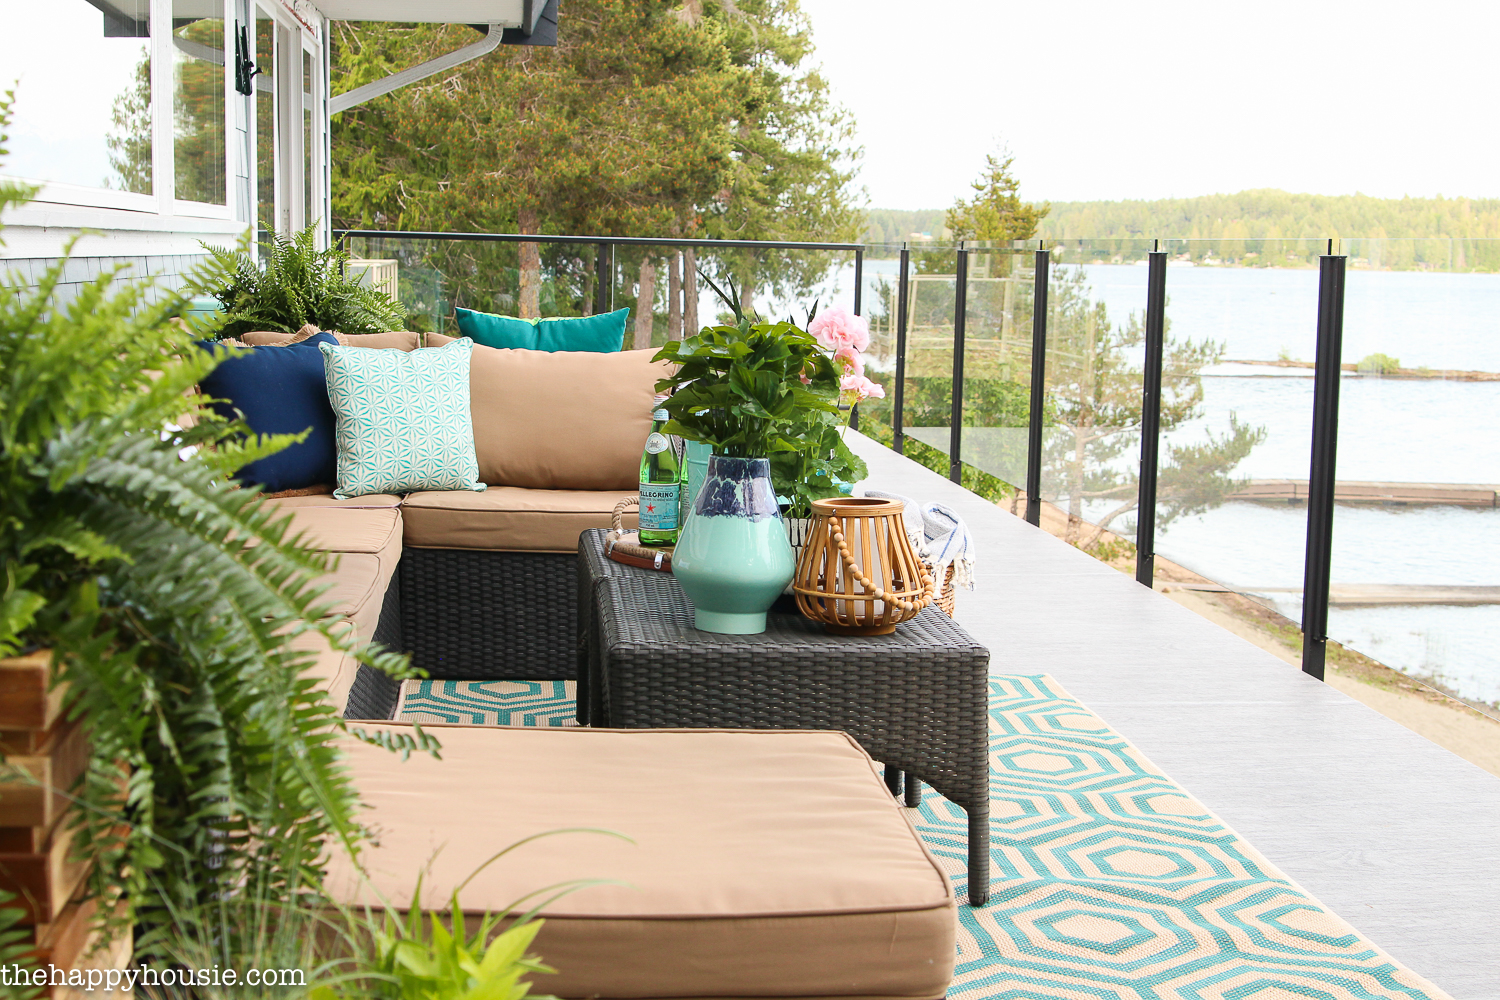 Patio deck overlooking the lake.